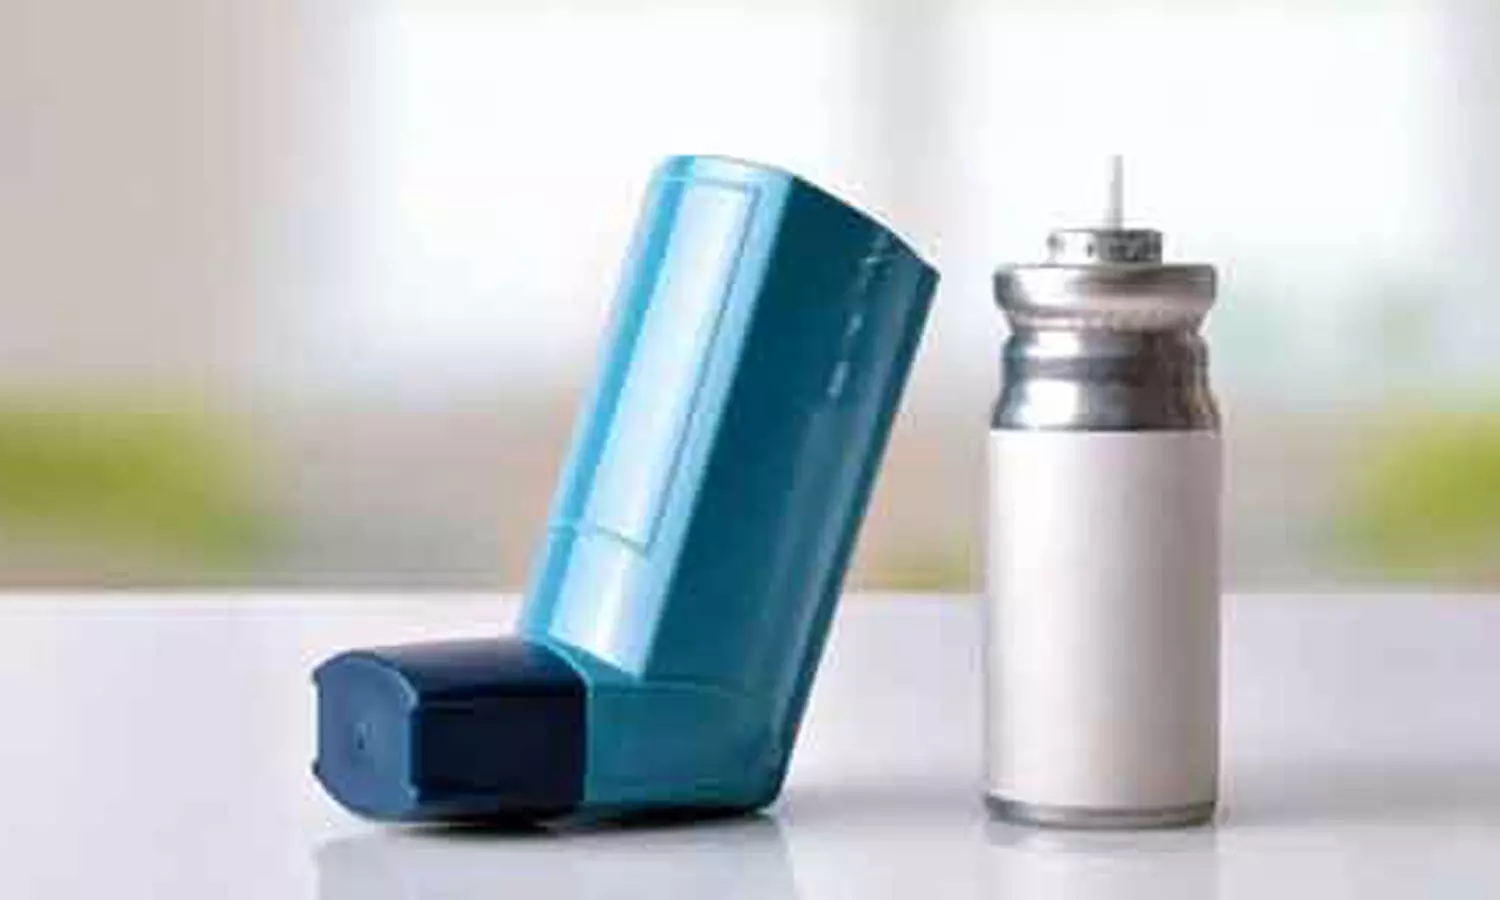 Albuterol and budesonide combo reduces risk of severe asthma exacerbations: NEJM